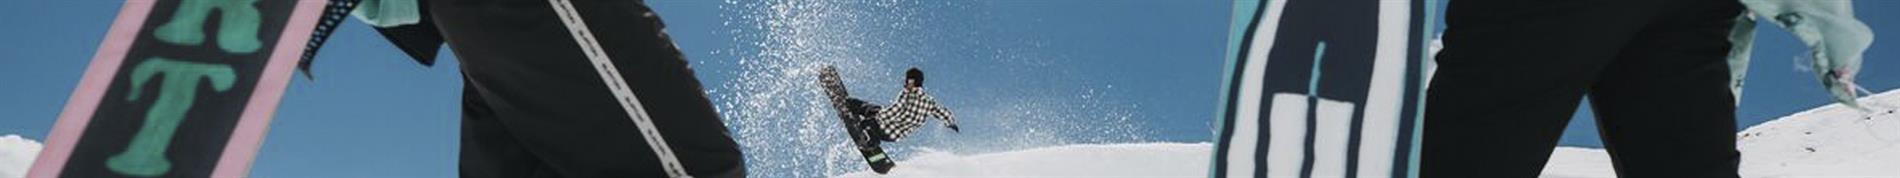 Capita High-Performance Snowboards for Kids 